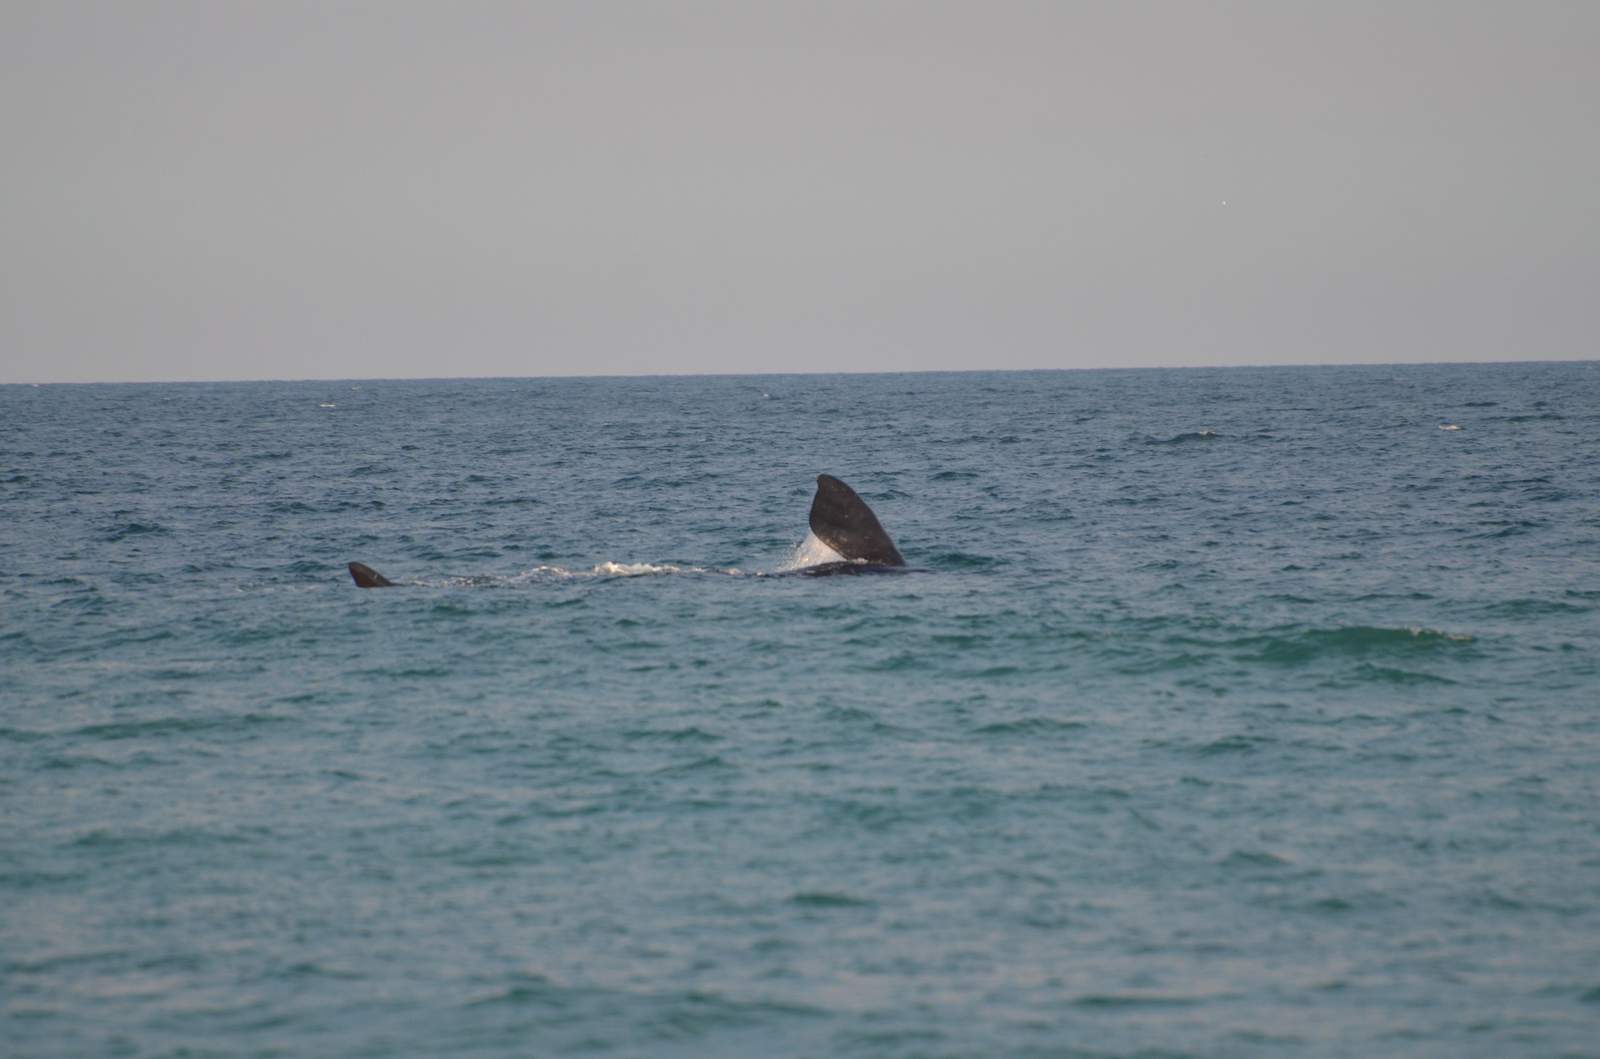 PHOTOS: Whale and calf spotted of South Melbourne Beach